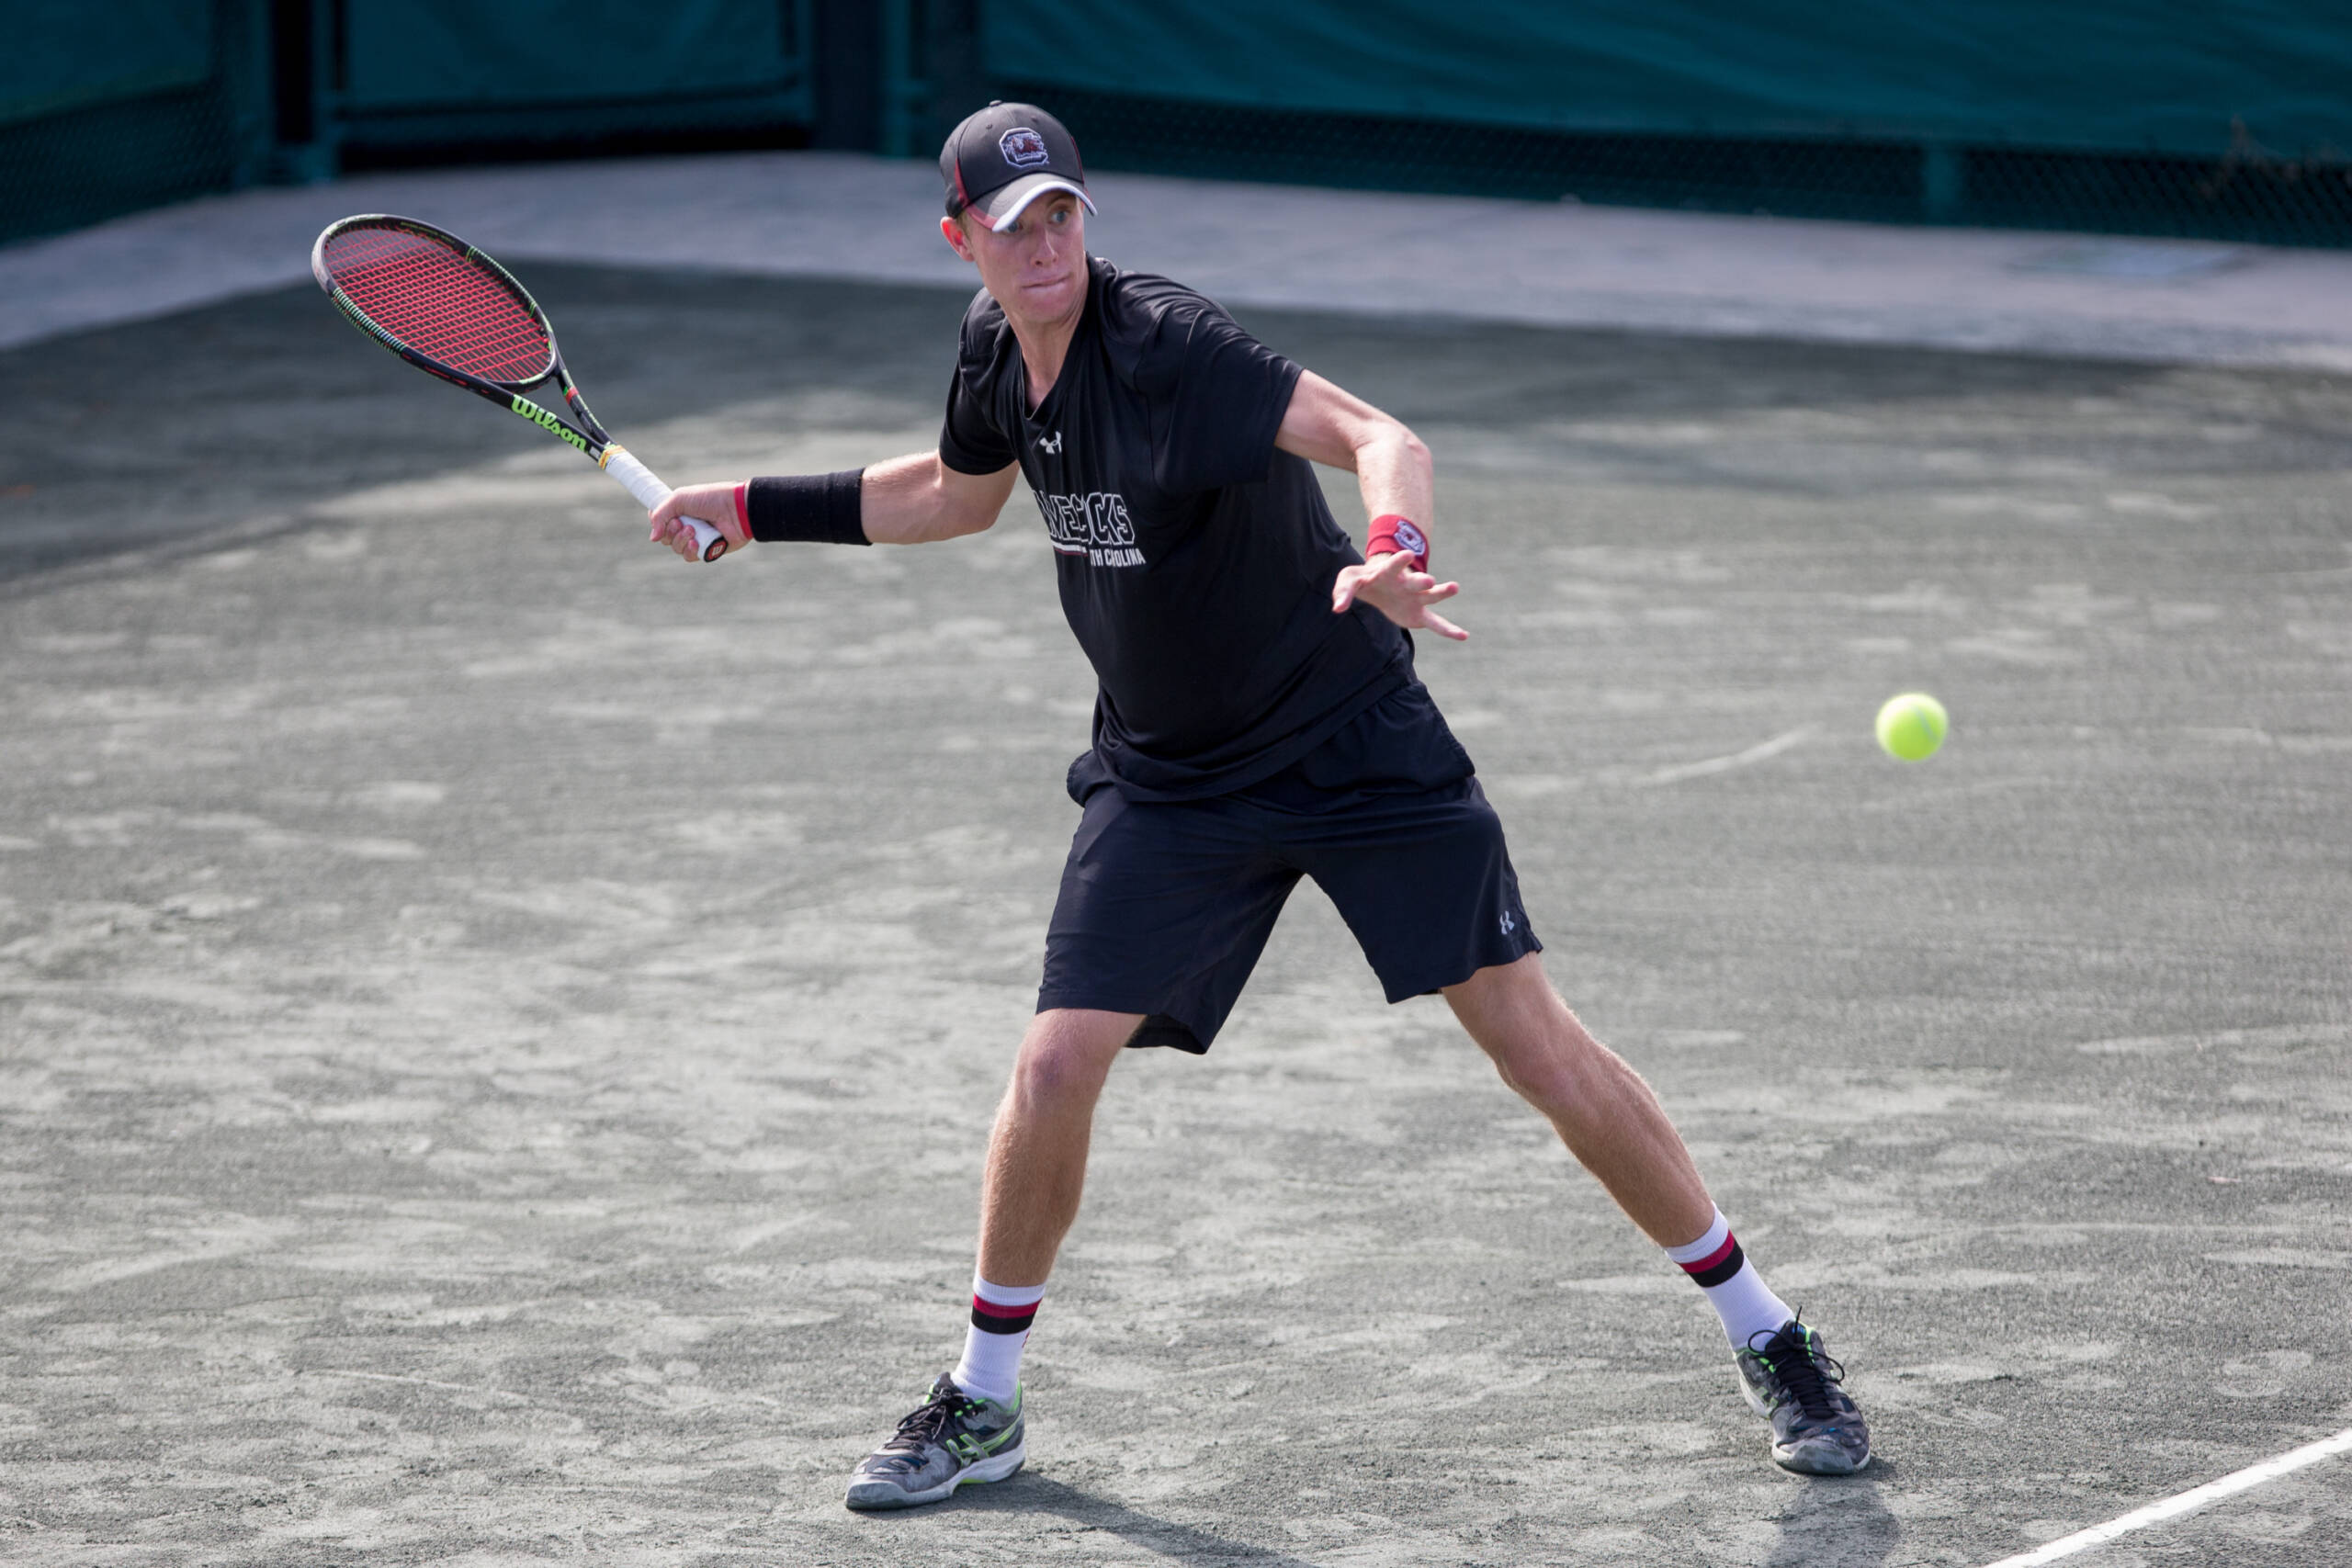 Friedrich, O'Keefe Continue Play at ITA All-American Championships